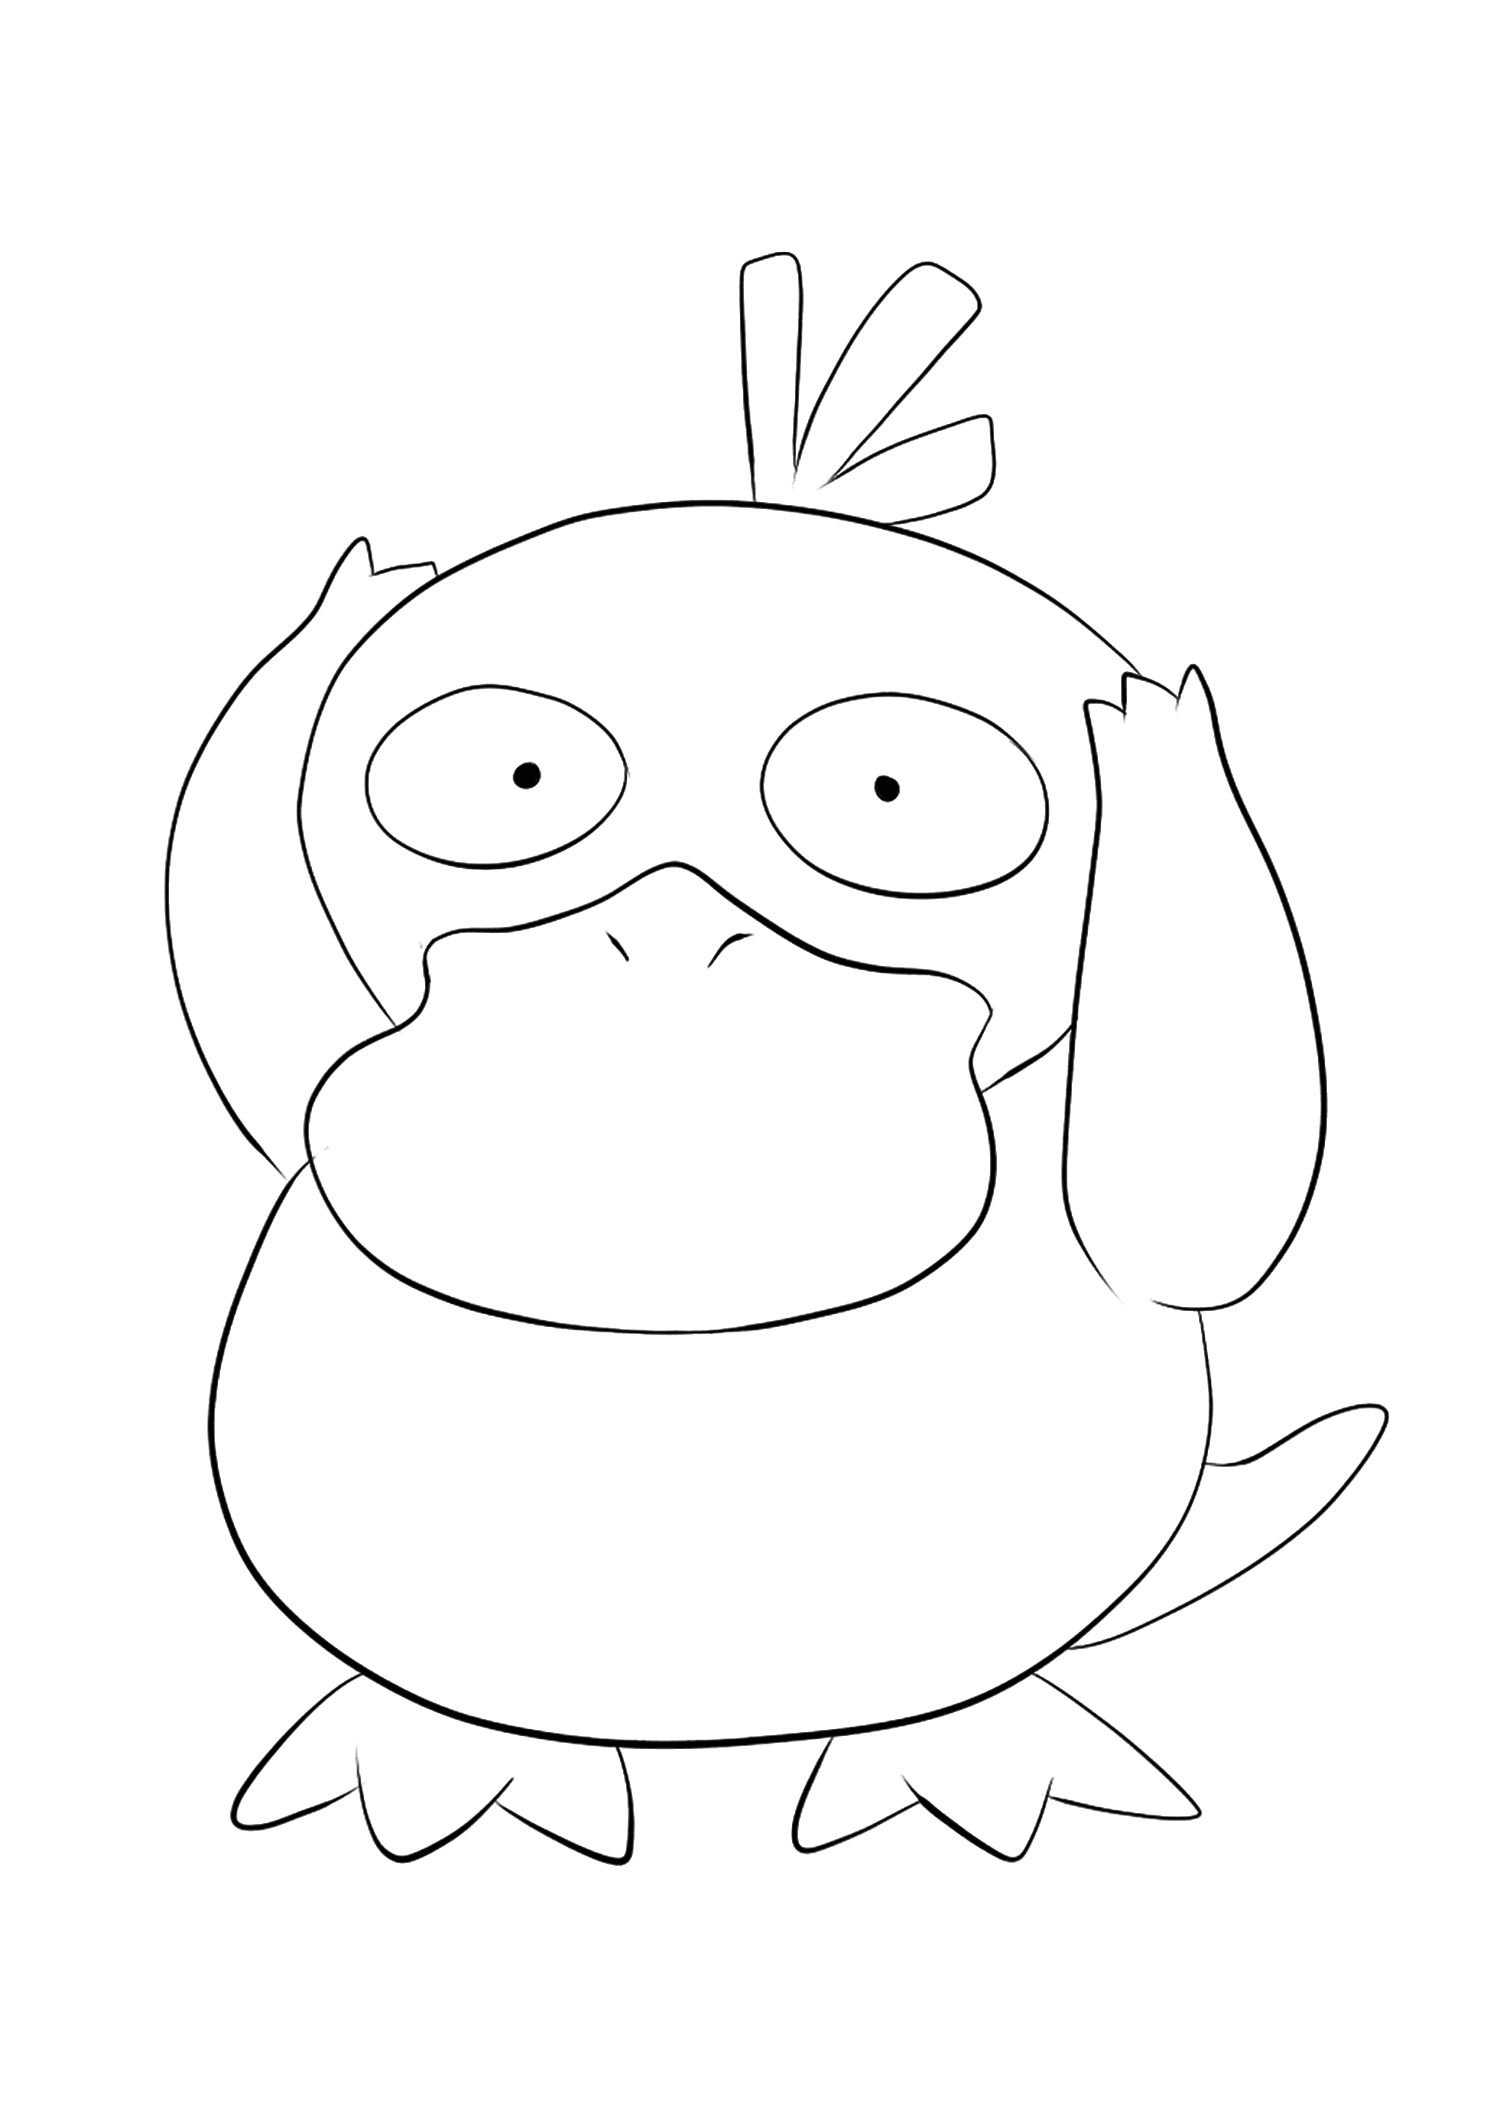 Psyduck (No.54) : Pokemon (Generation I) - All Pokemon coloring pages ...